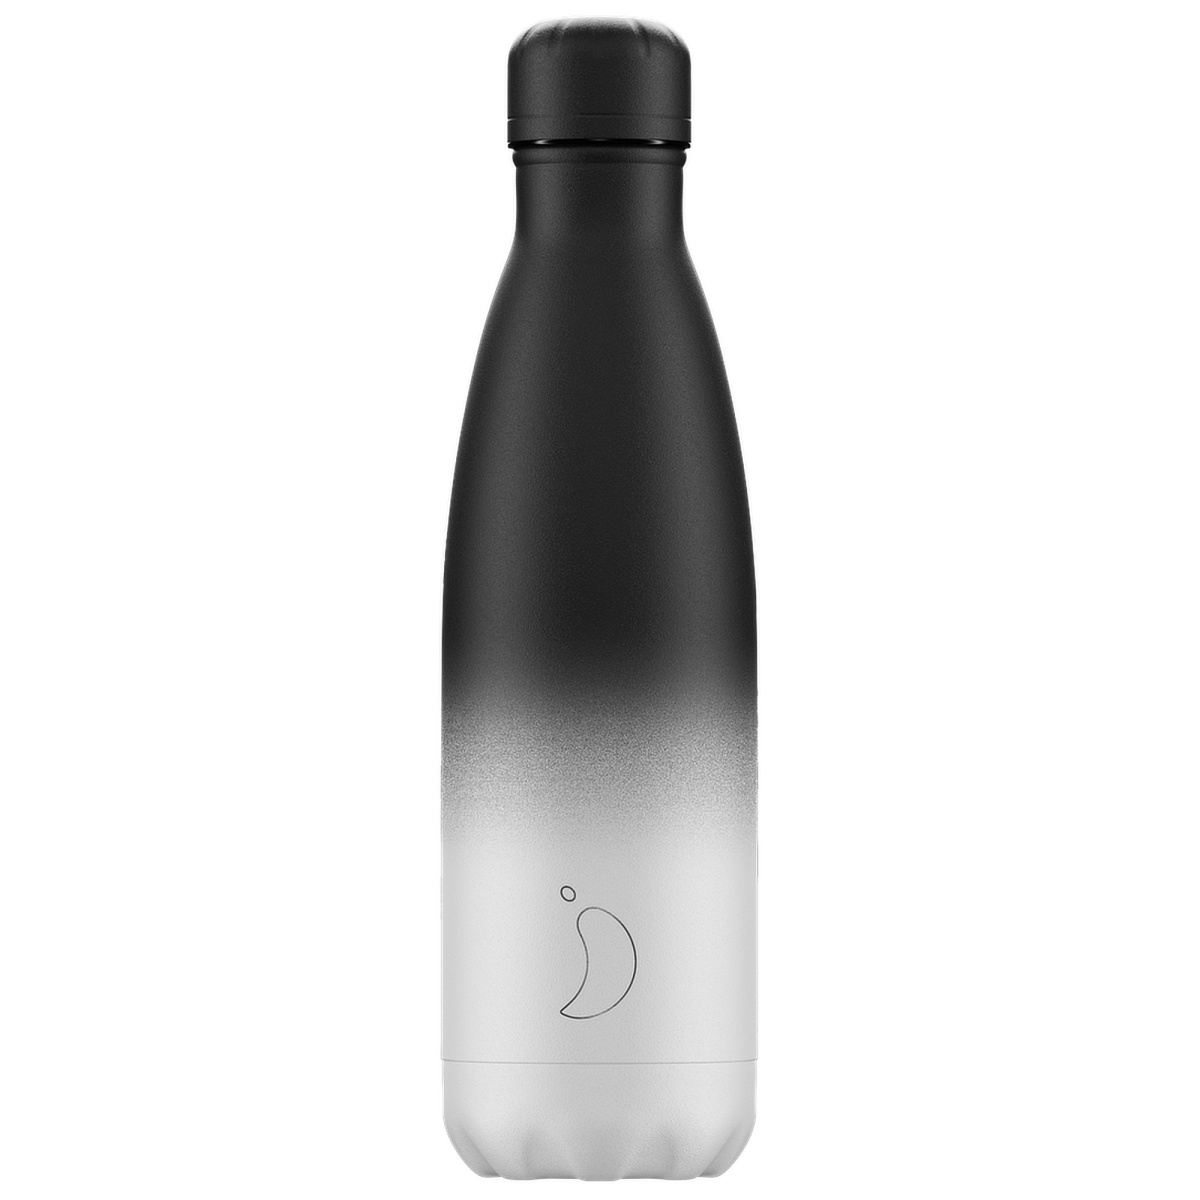 Chilly's thermo drink bottle - Black/white